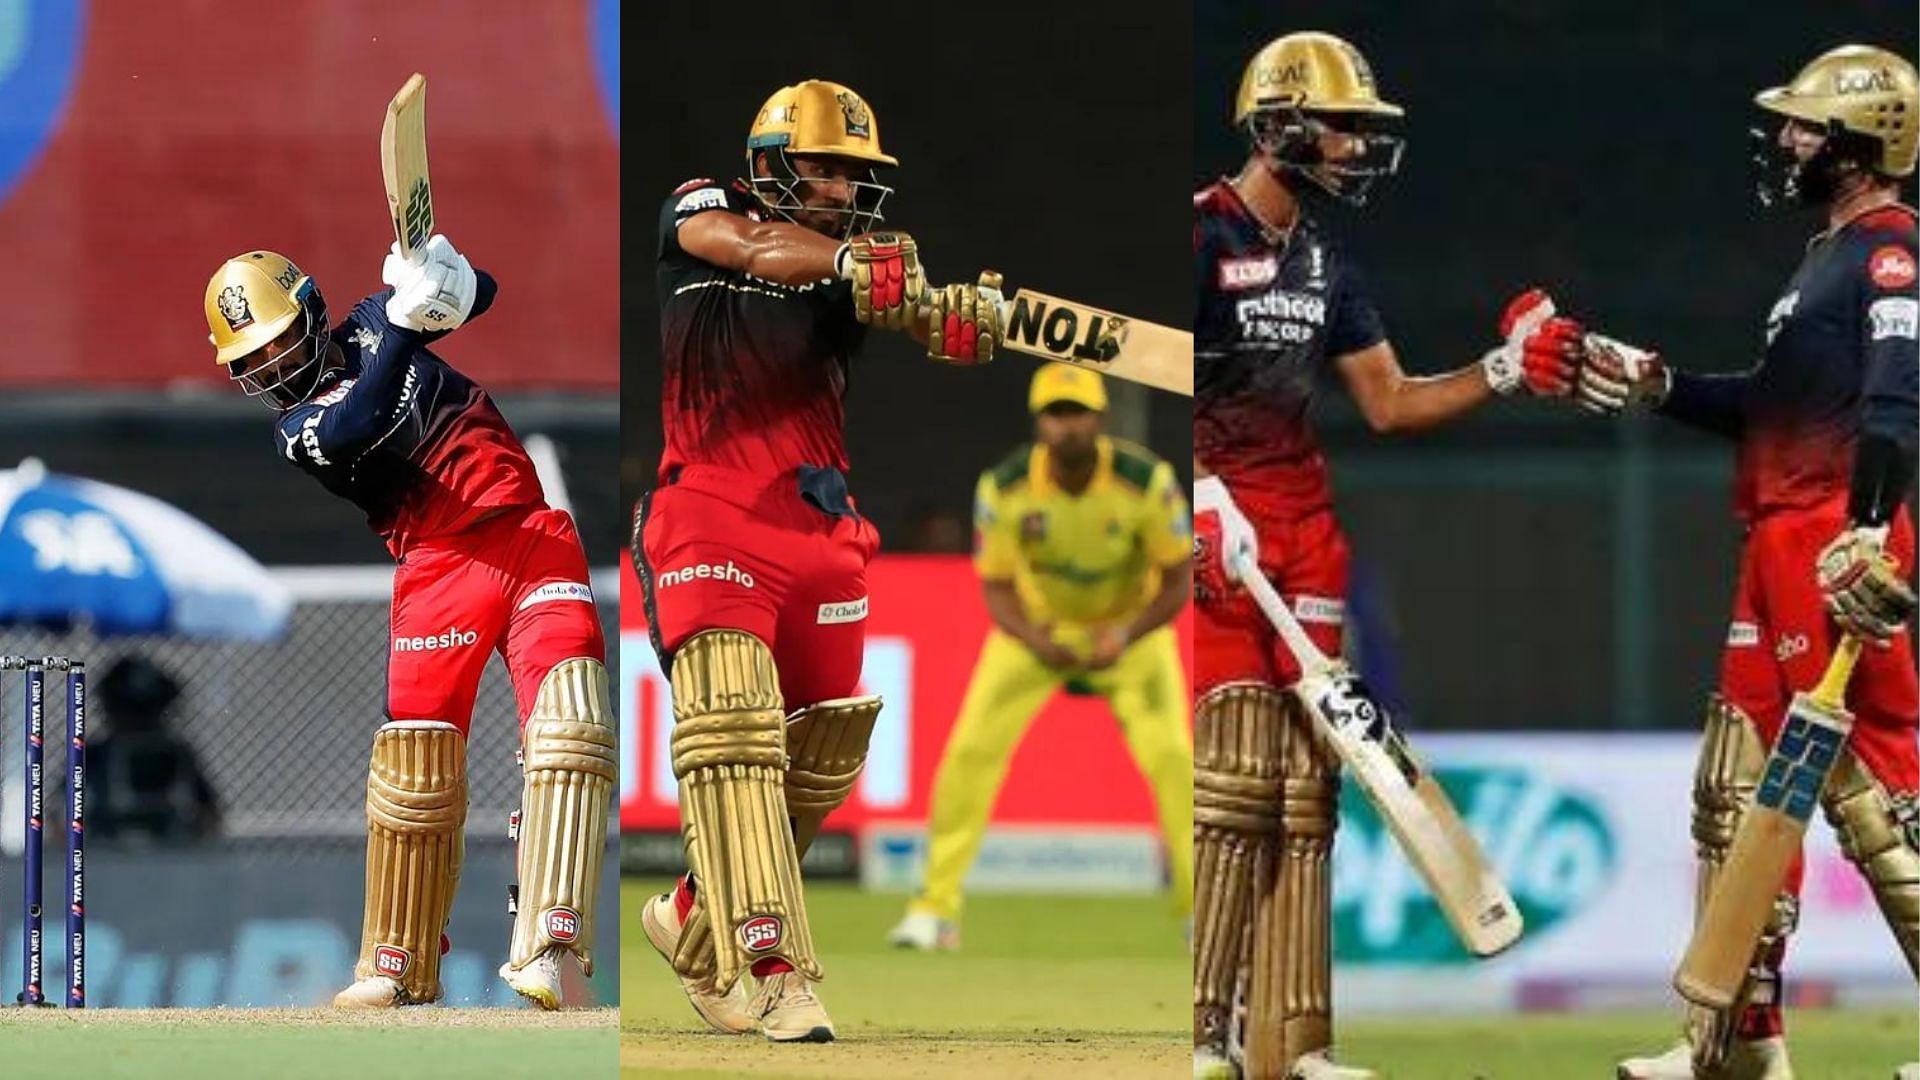 RCB have not been reliant on just their big stars to perform this season. (P.C.:iplt20.com)